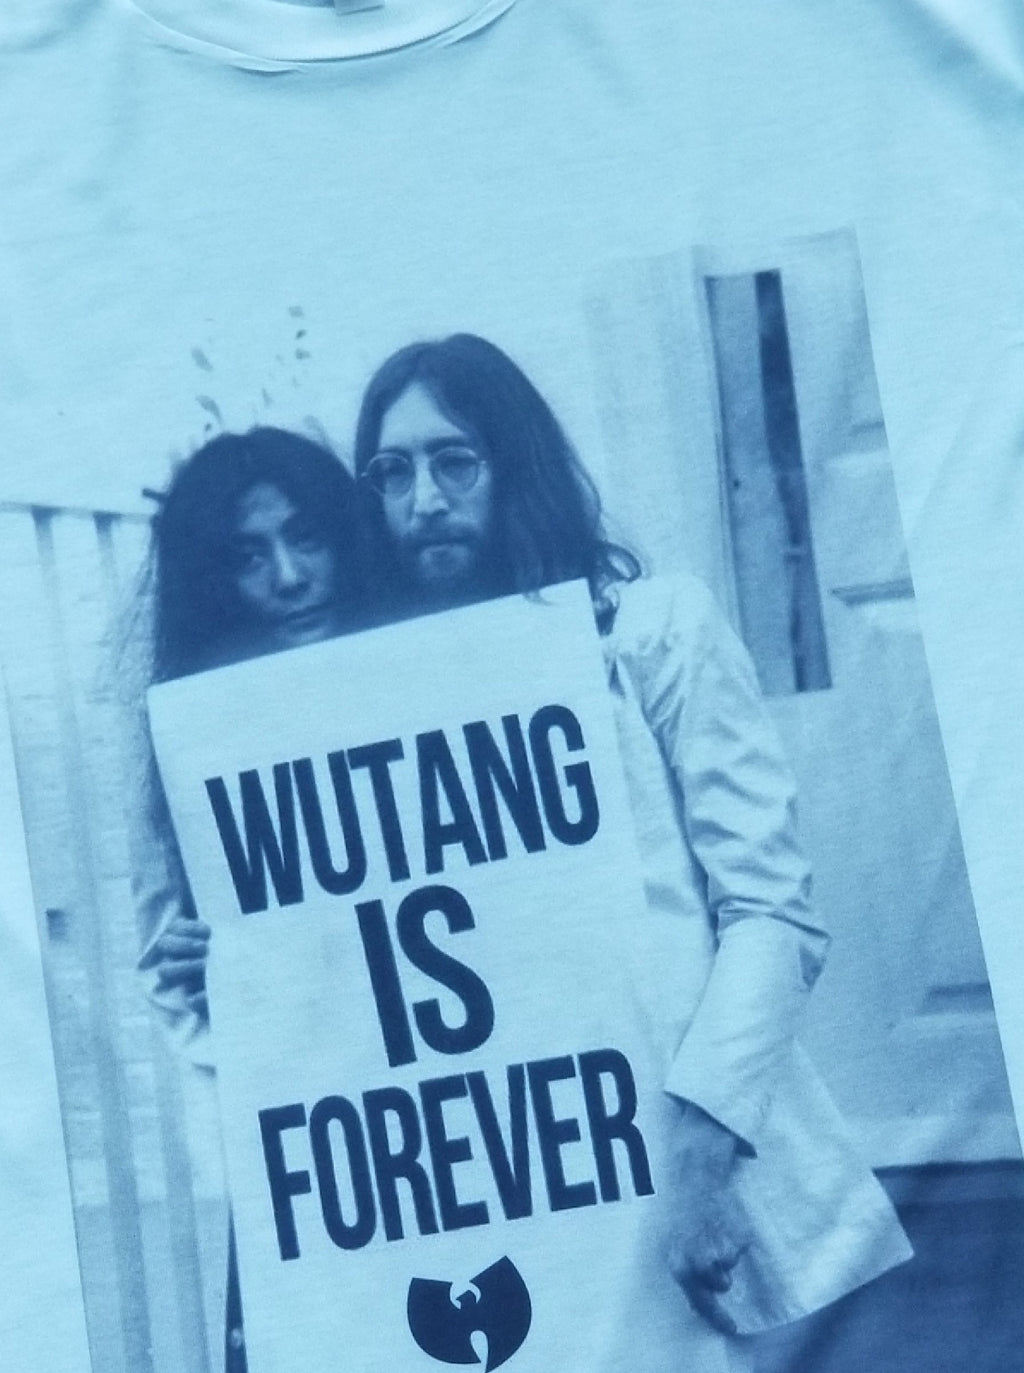 WUTANG IS FOREVER